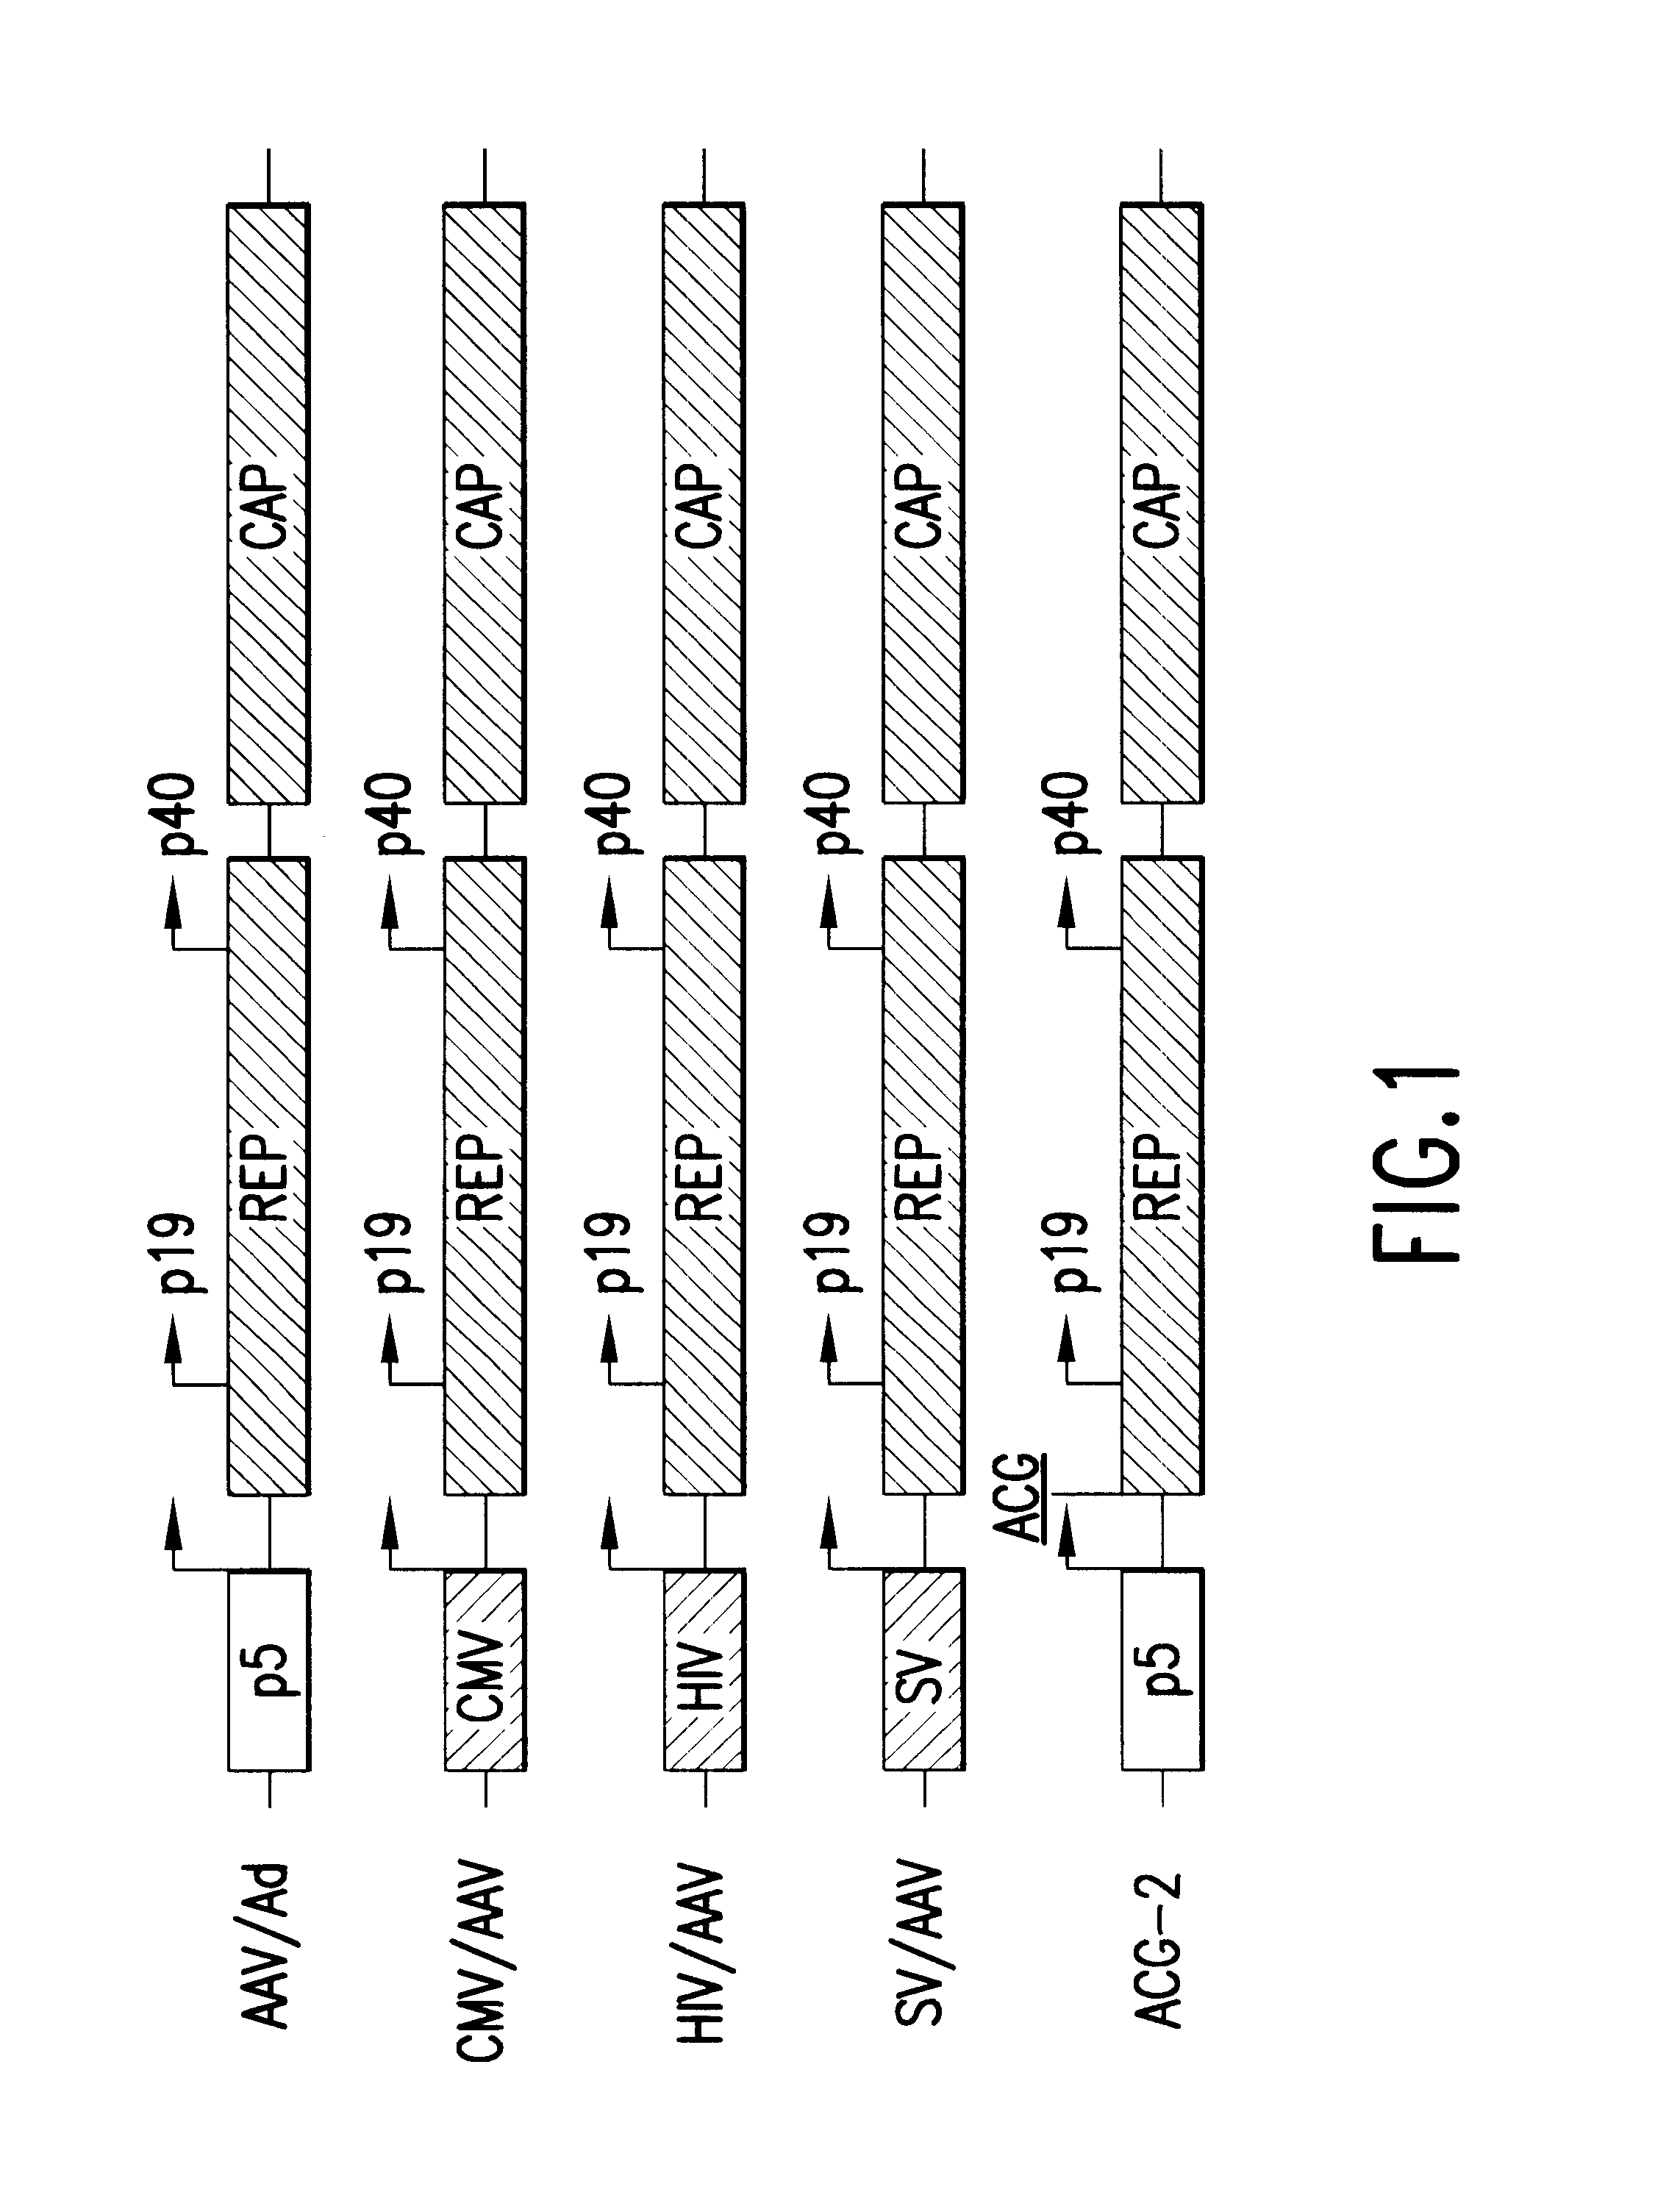 Methods for increasing the efficiency of recombinant AAV product